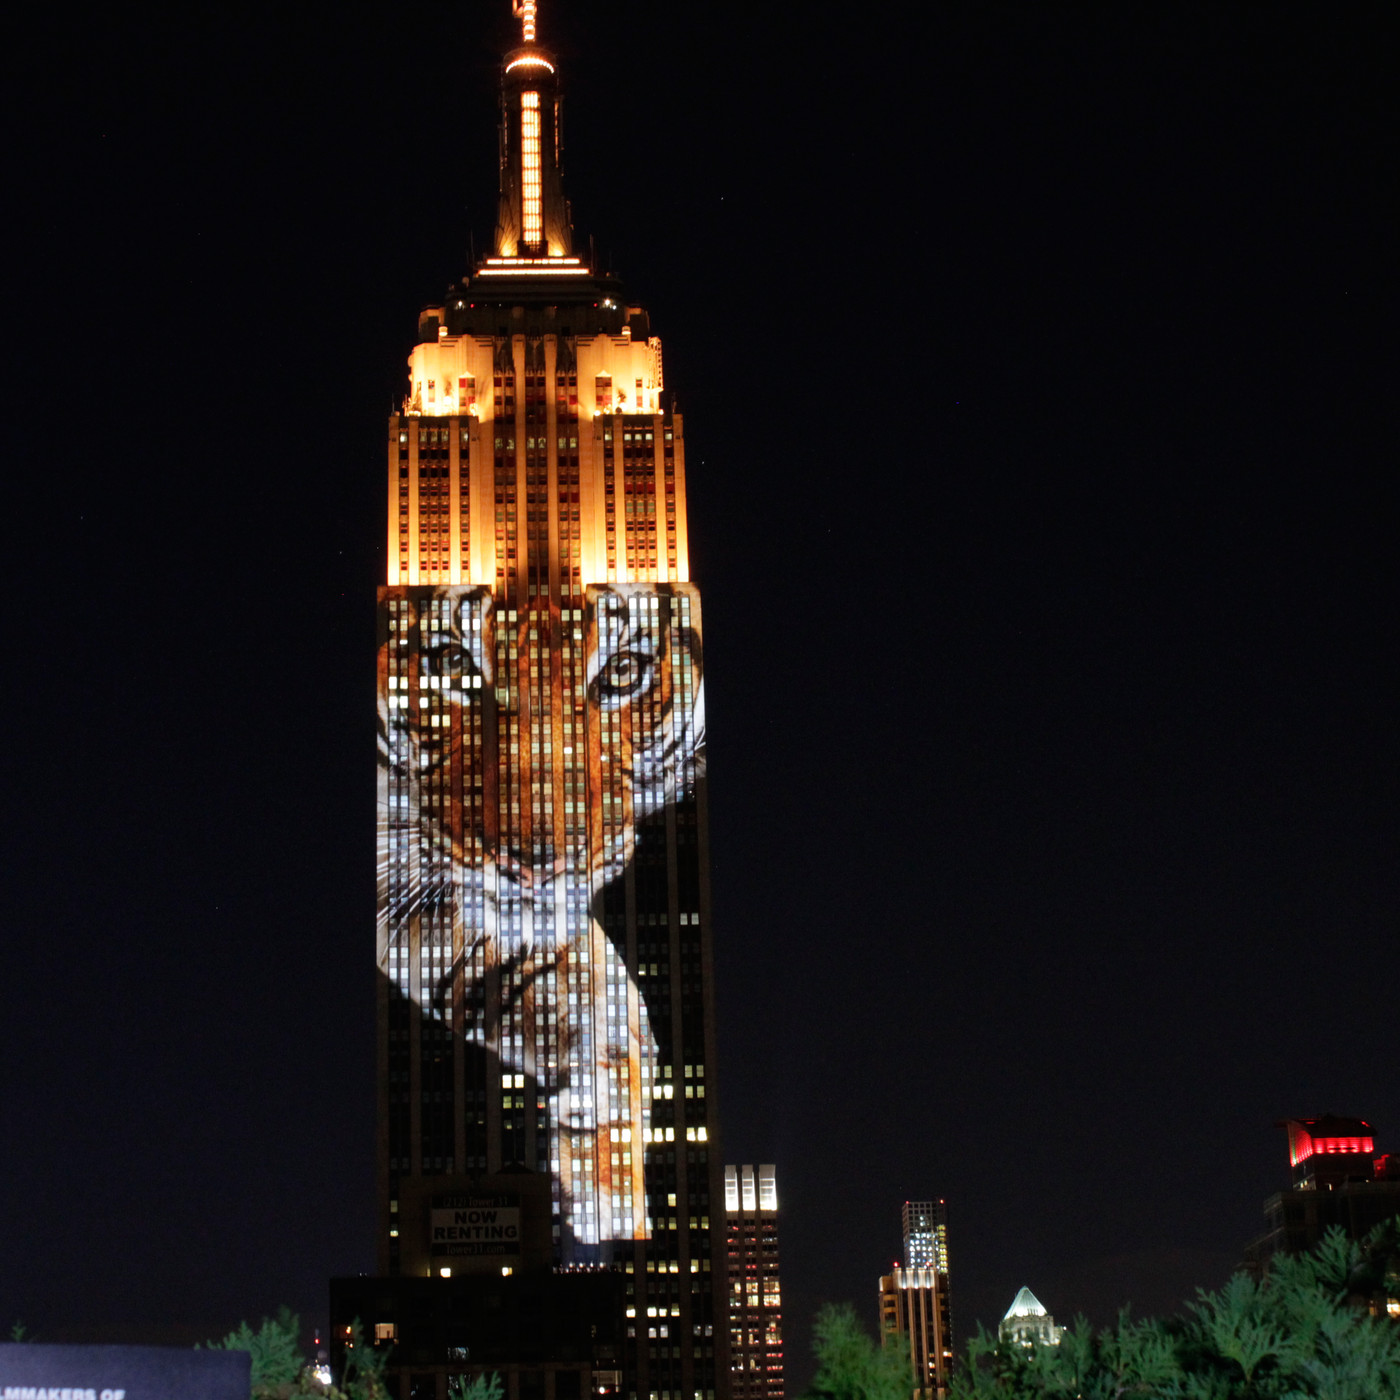 Last night The Empire State Building became the face of extinction ...